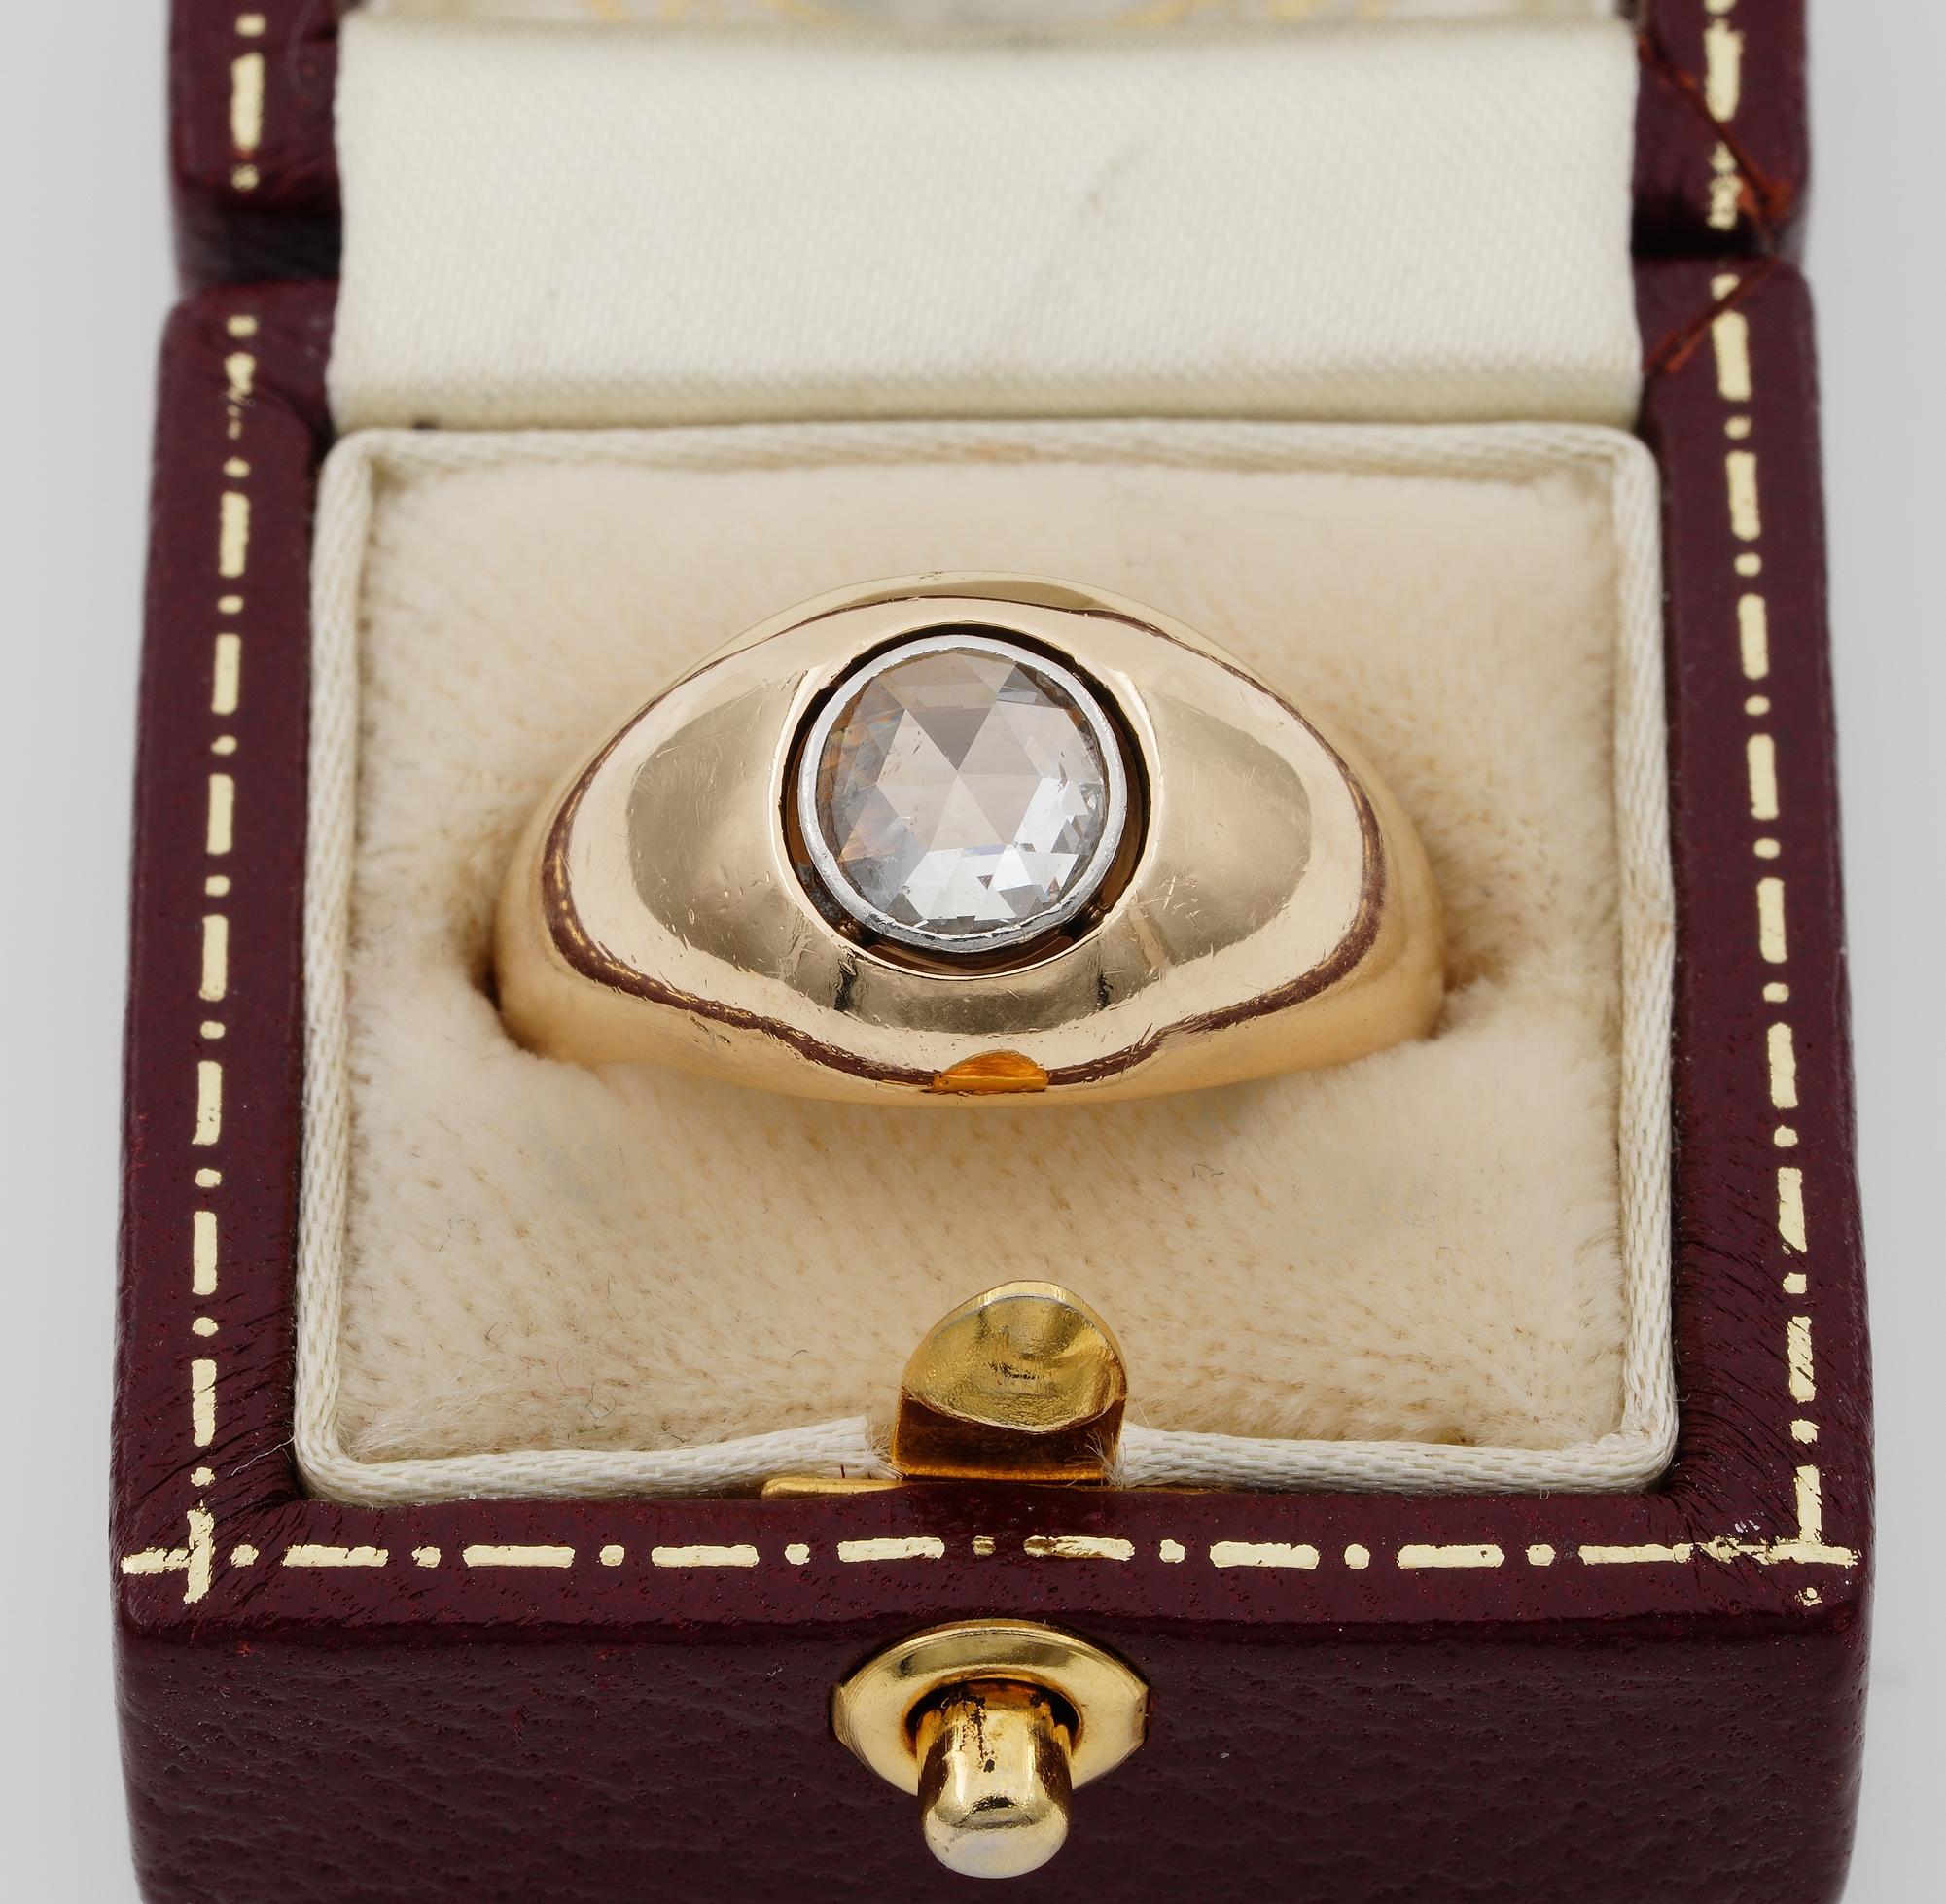 Iconic Victorian
Awesome flush set ring from the Victorian period, a classy statement ring, 1890 ca
Heavy mount hand crafted of solid 18 Kt gold, tested
Centrally set in a round silver target a stunning and perfect Rose cut Dutch Diamond in